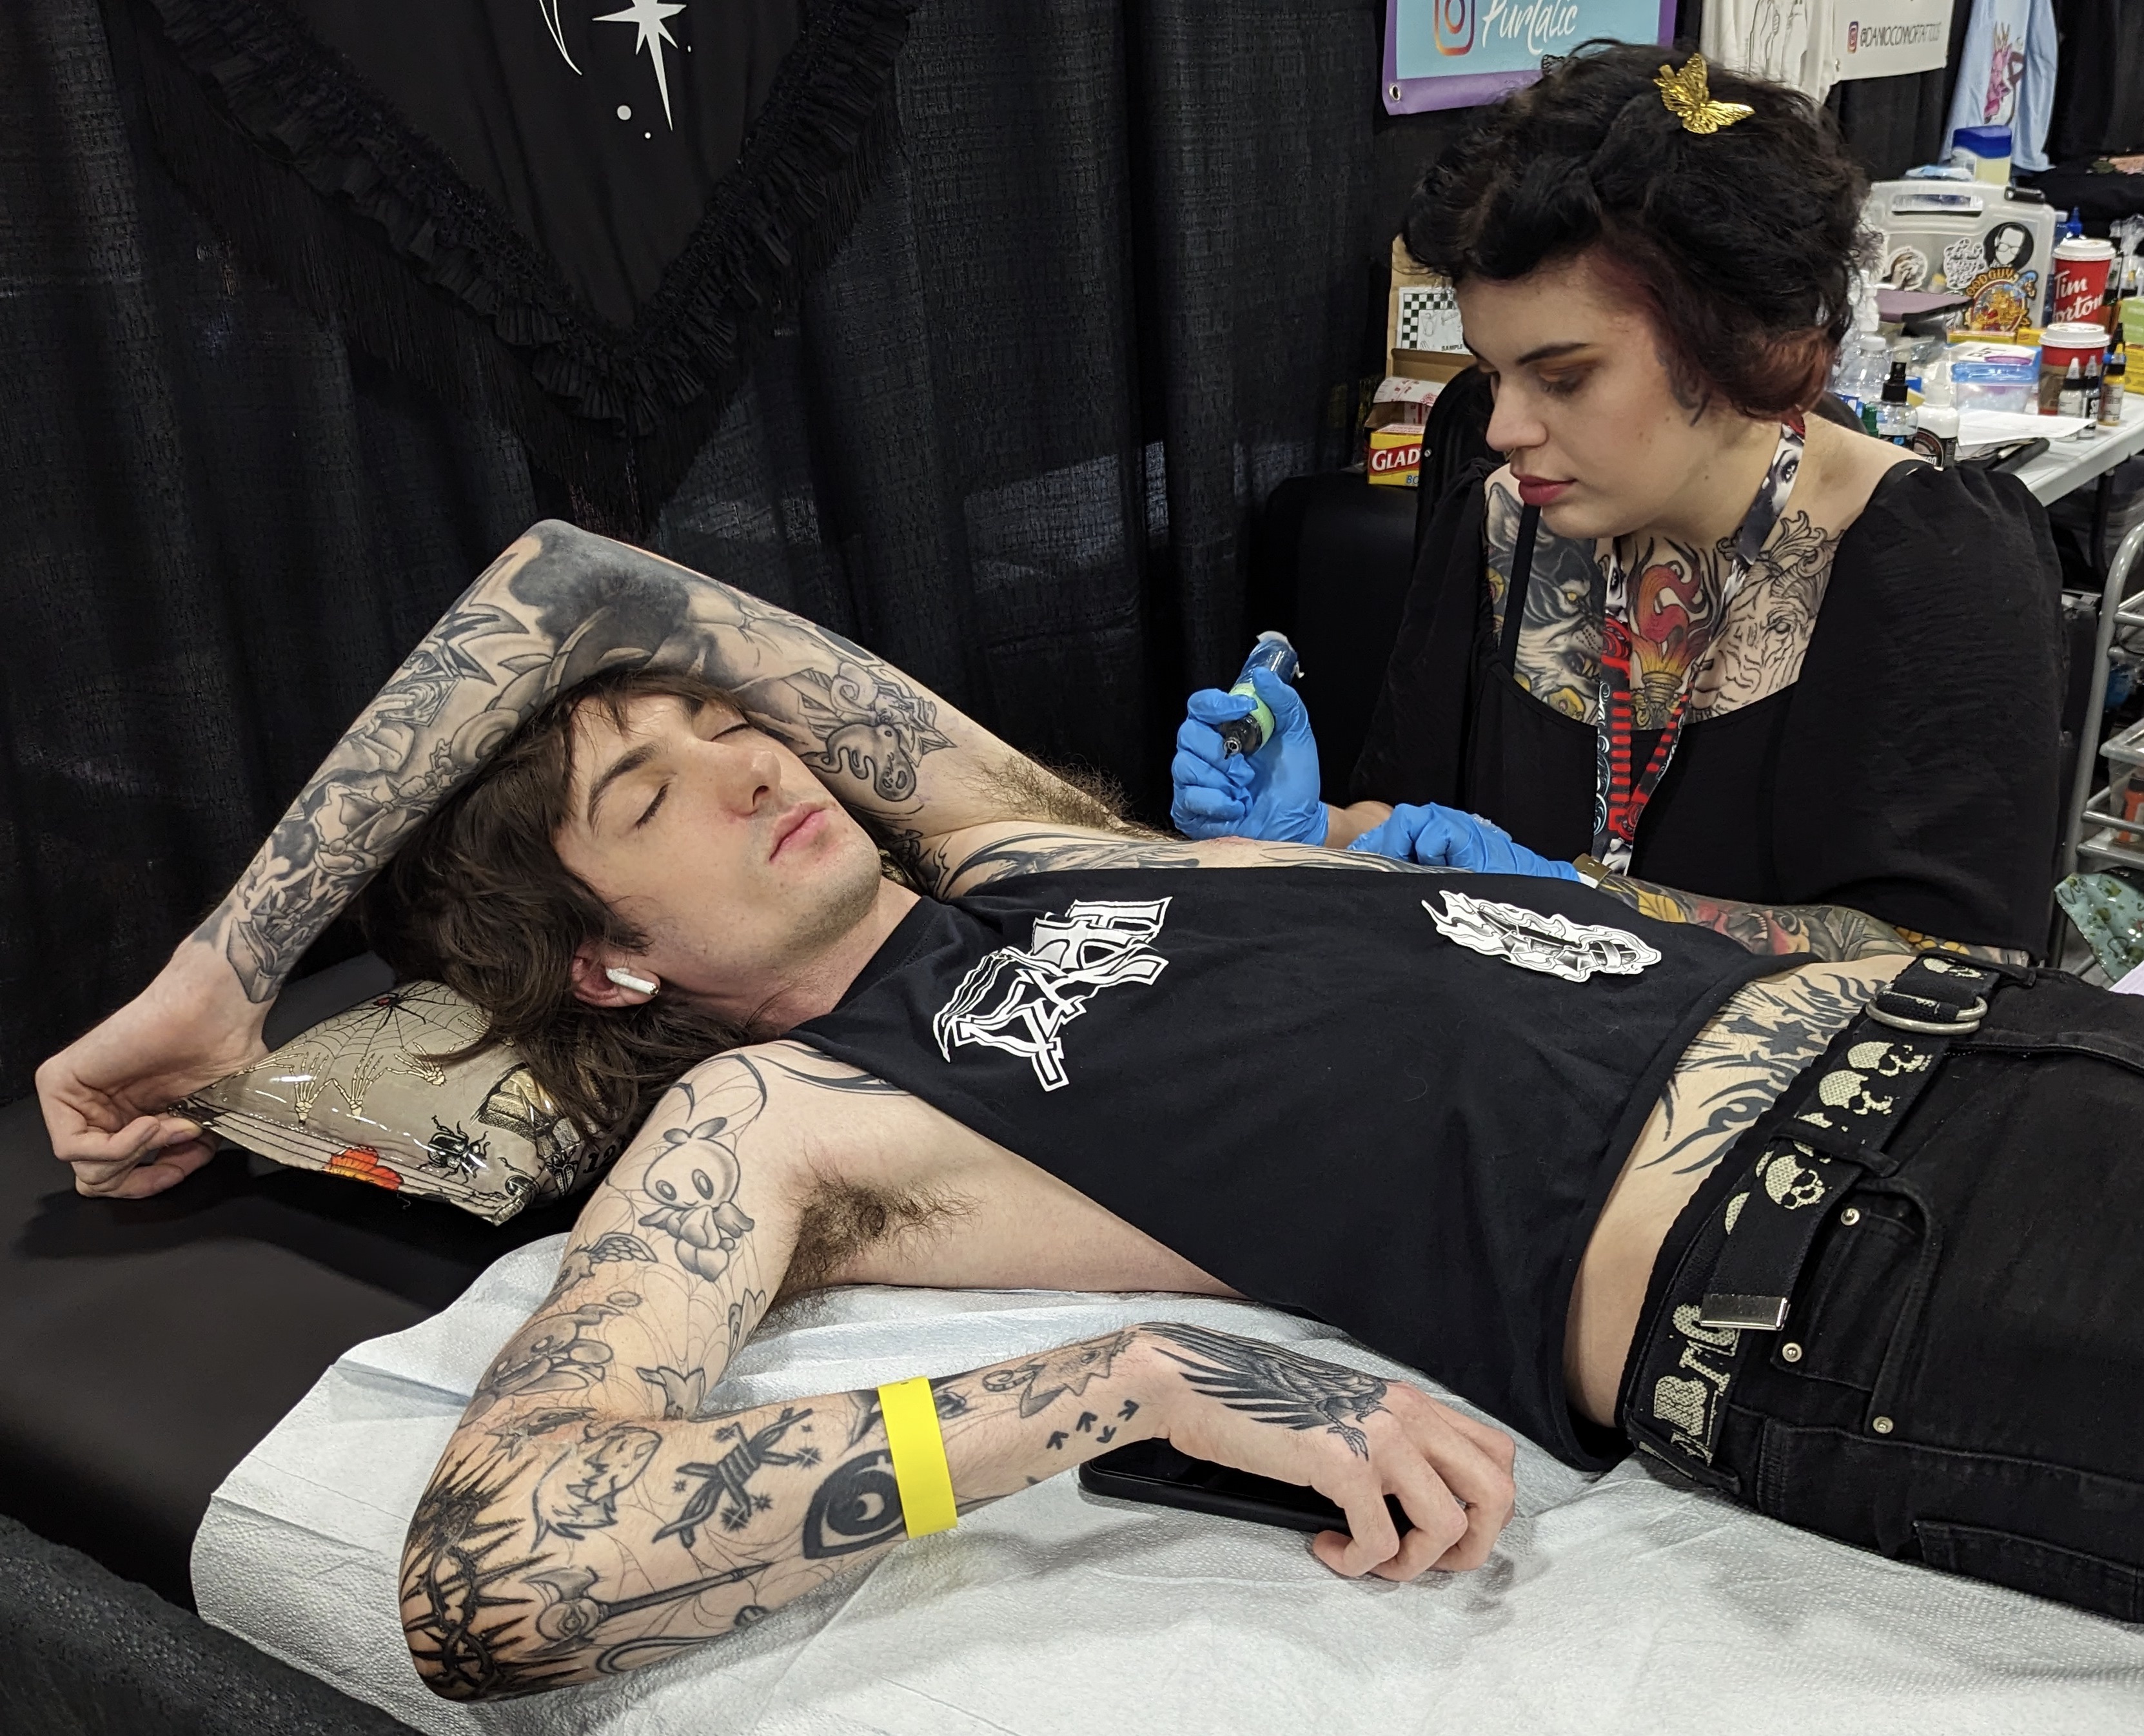 Tattoo artists hope to tell story with their work at Barrie expo - Barrie News